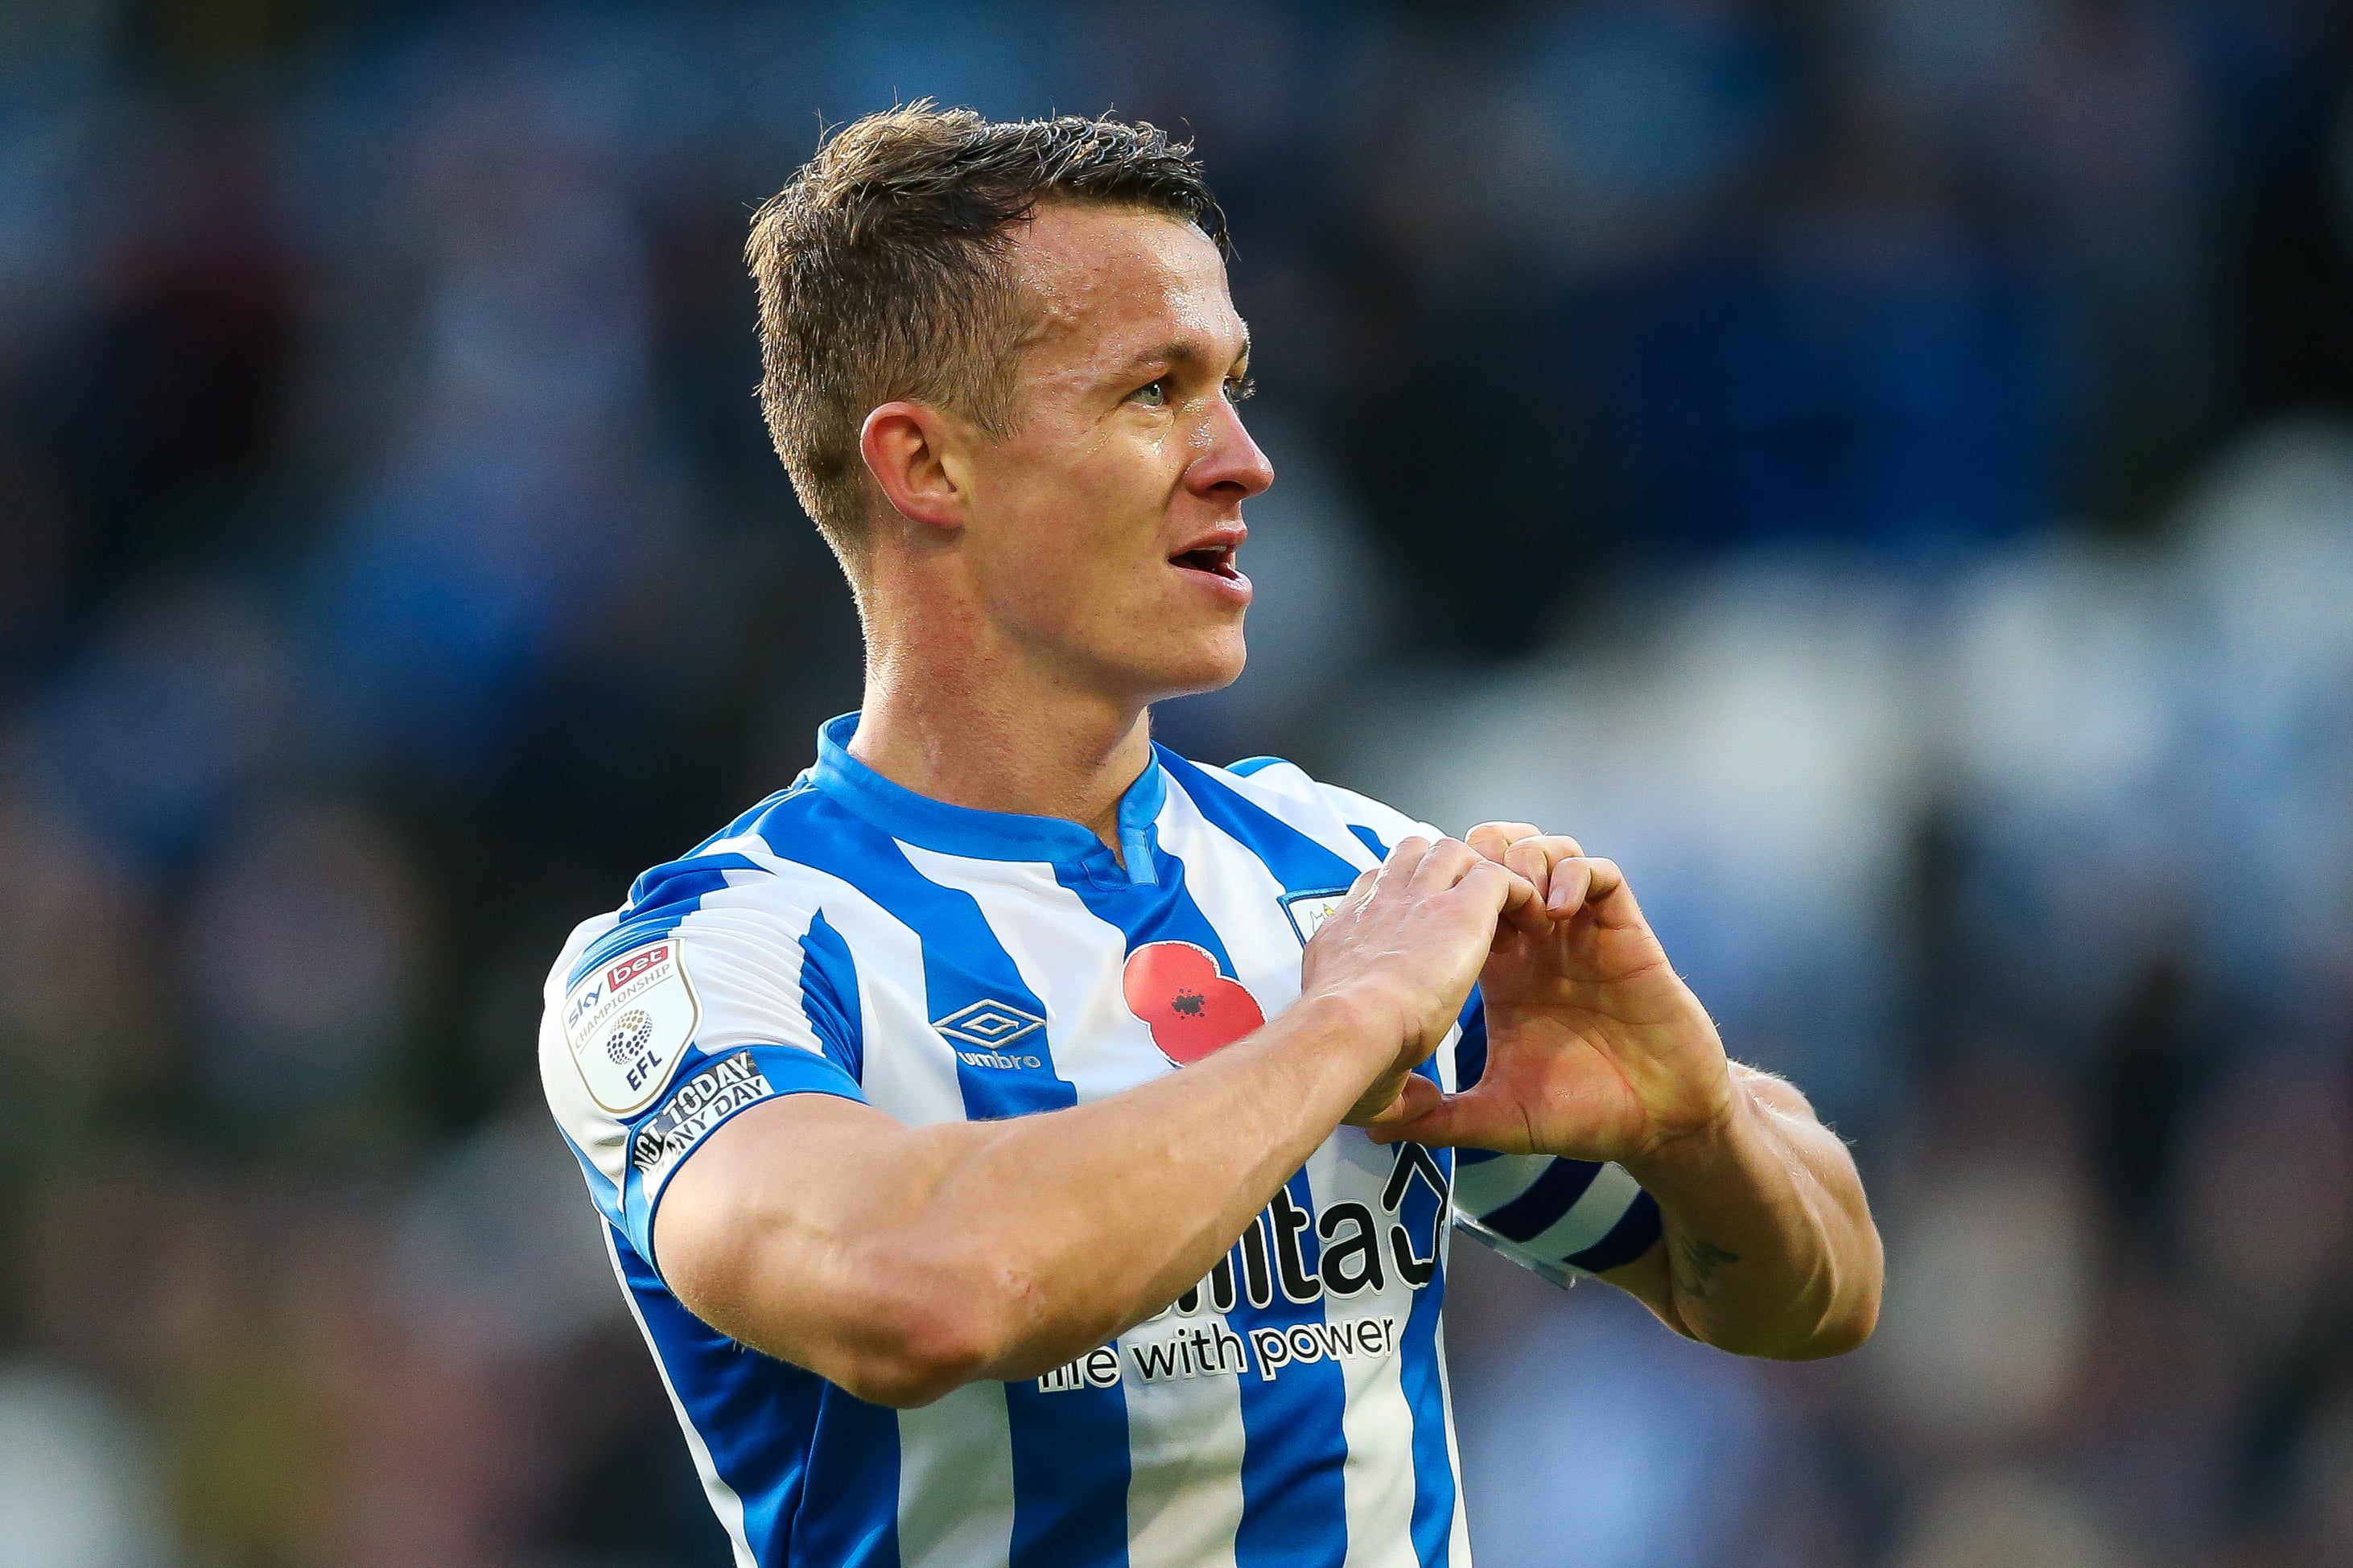 Jonathan Hogg is hoping to lead Huddersfield back to the Premier League (Barrington Coombs/PA)